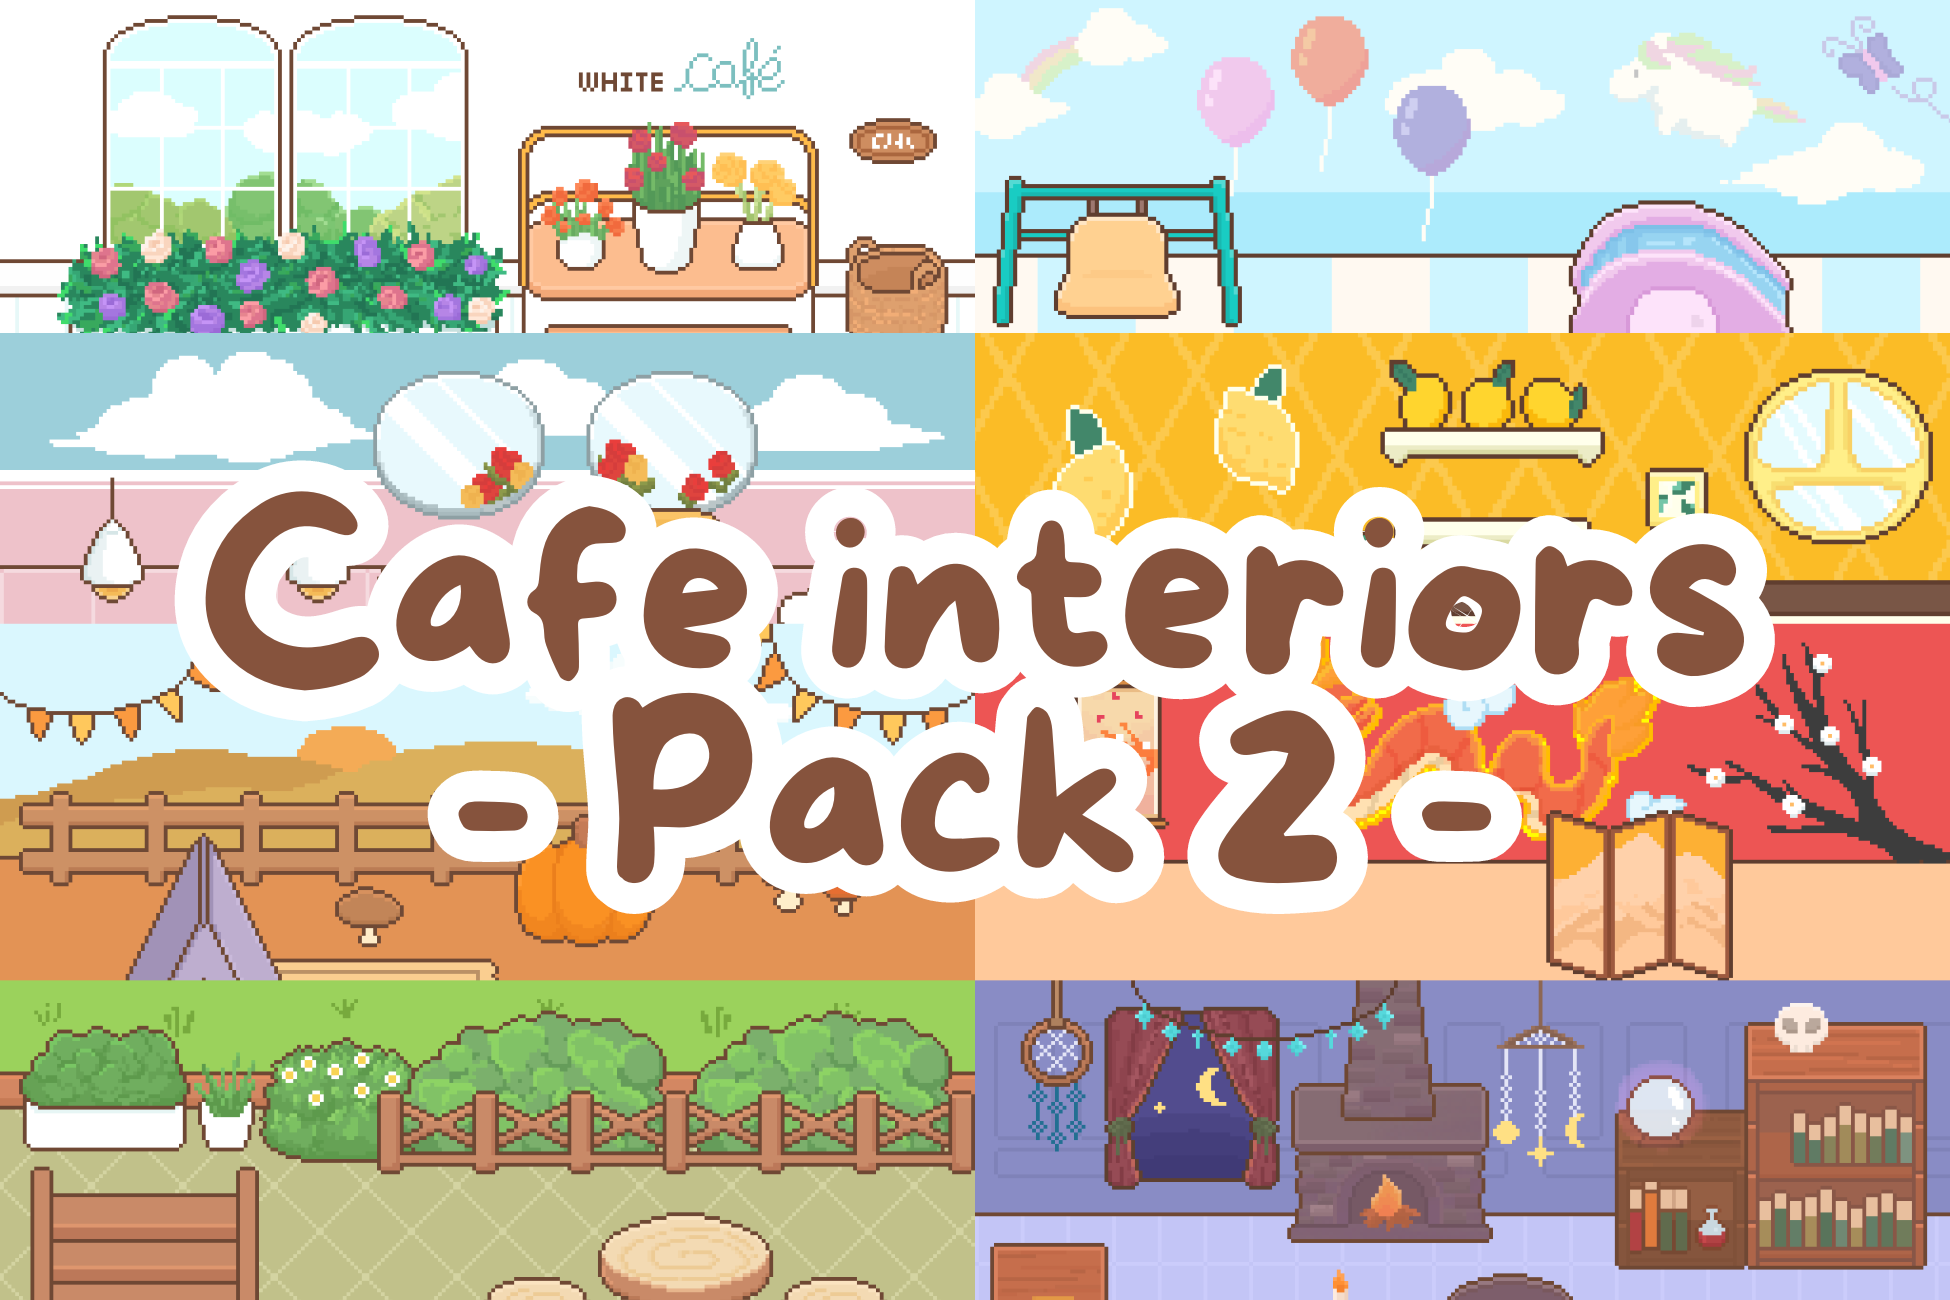 300+ Cafe interiors - Pack 2